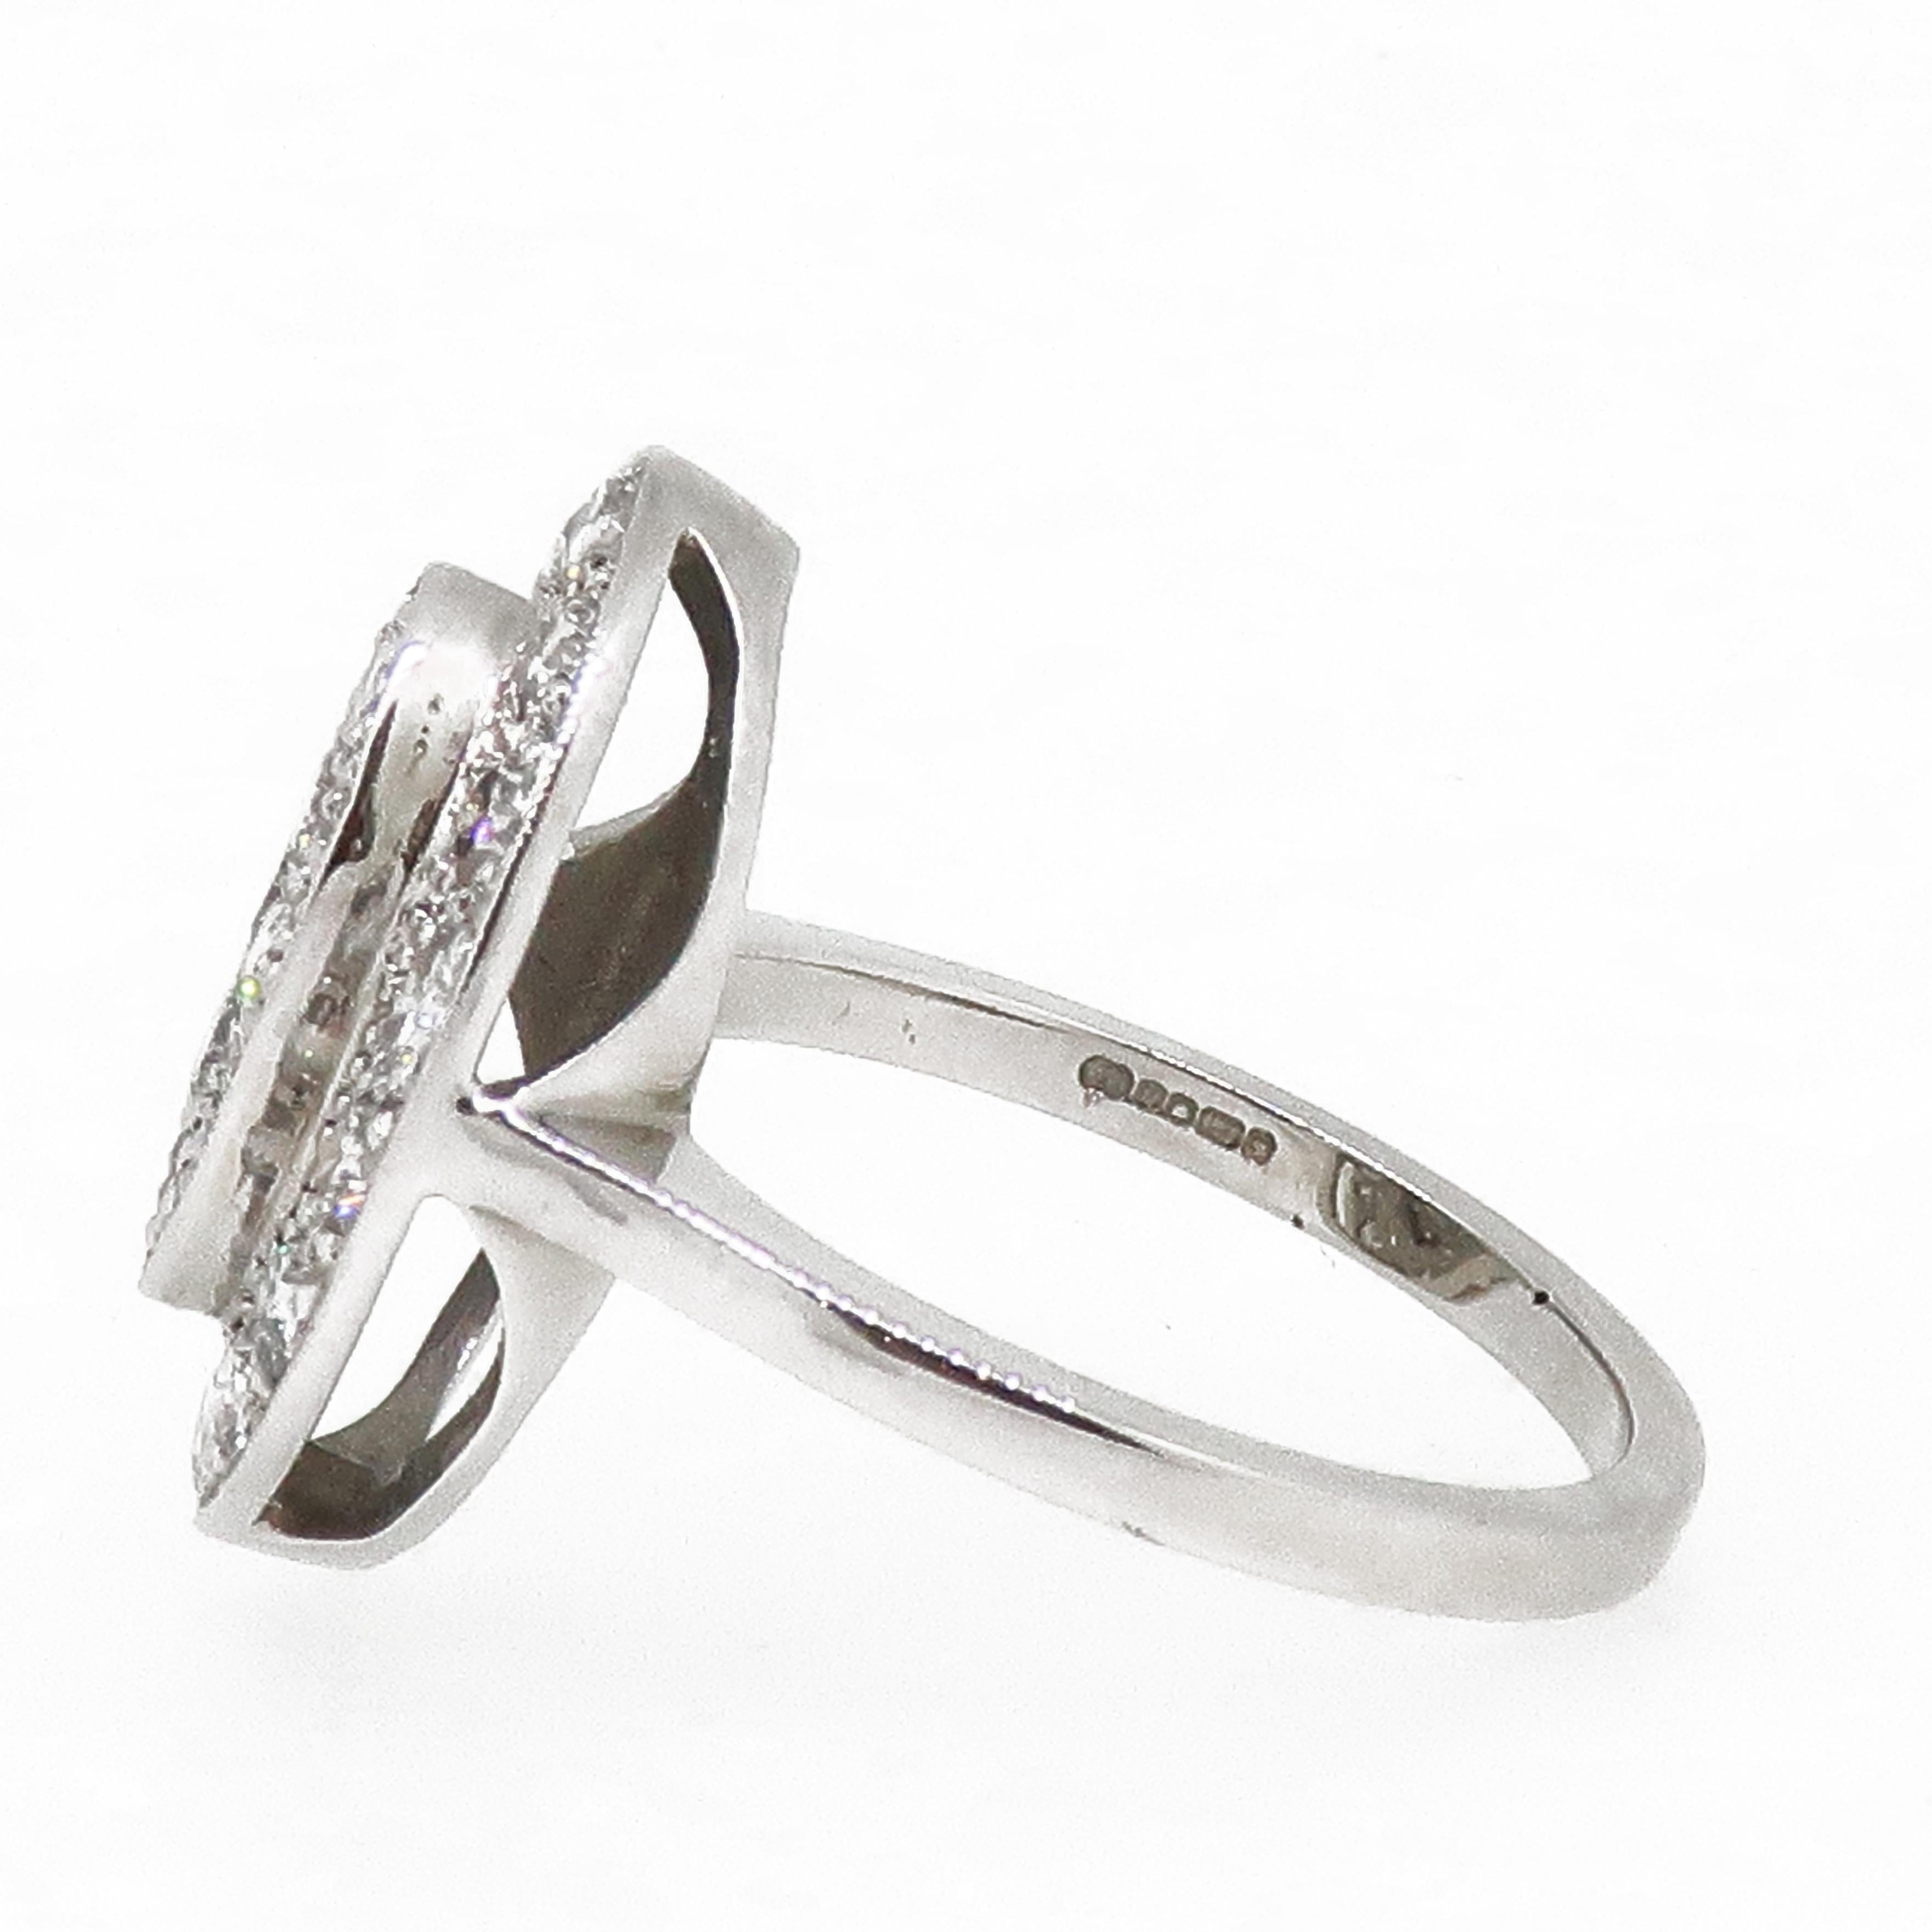 Diamond Cluster Ring 18 Karat White Gold

A dazzling diamond cluster ring. This plaque style diamond cluster is marquise in shape, with a raised marquise centre. The ring is set with sparkling brilliant cut diamonds all set in a grain setting on